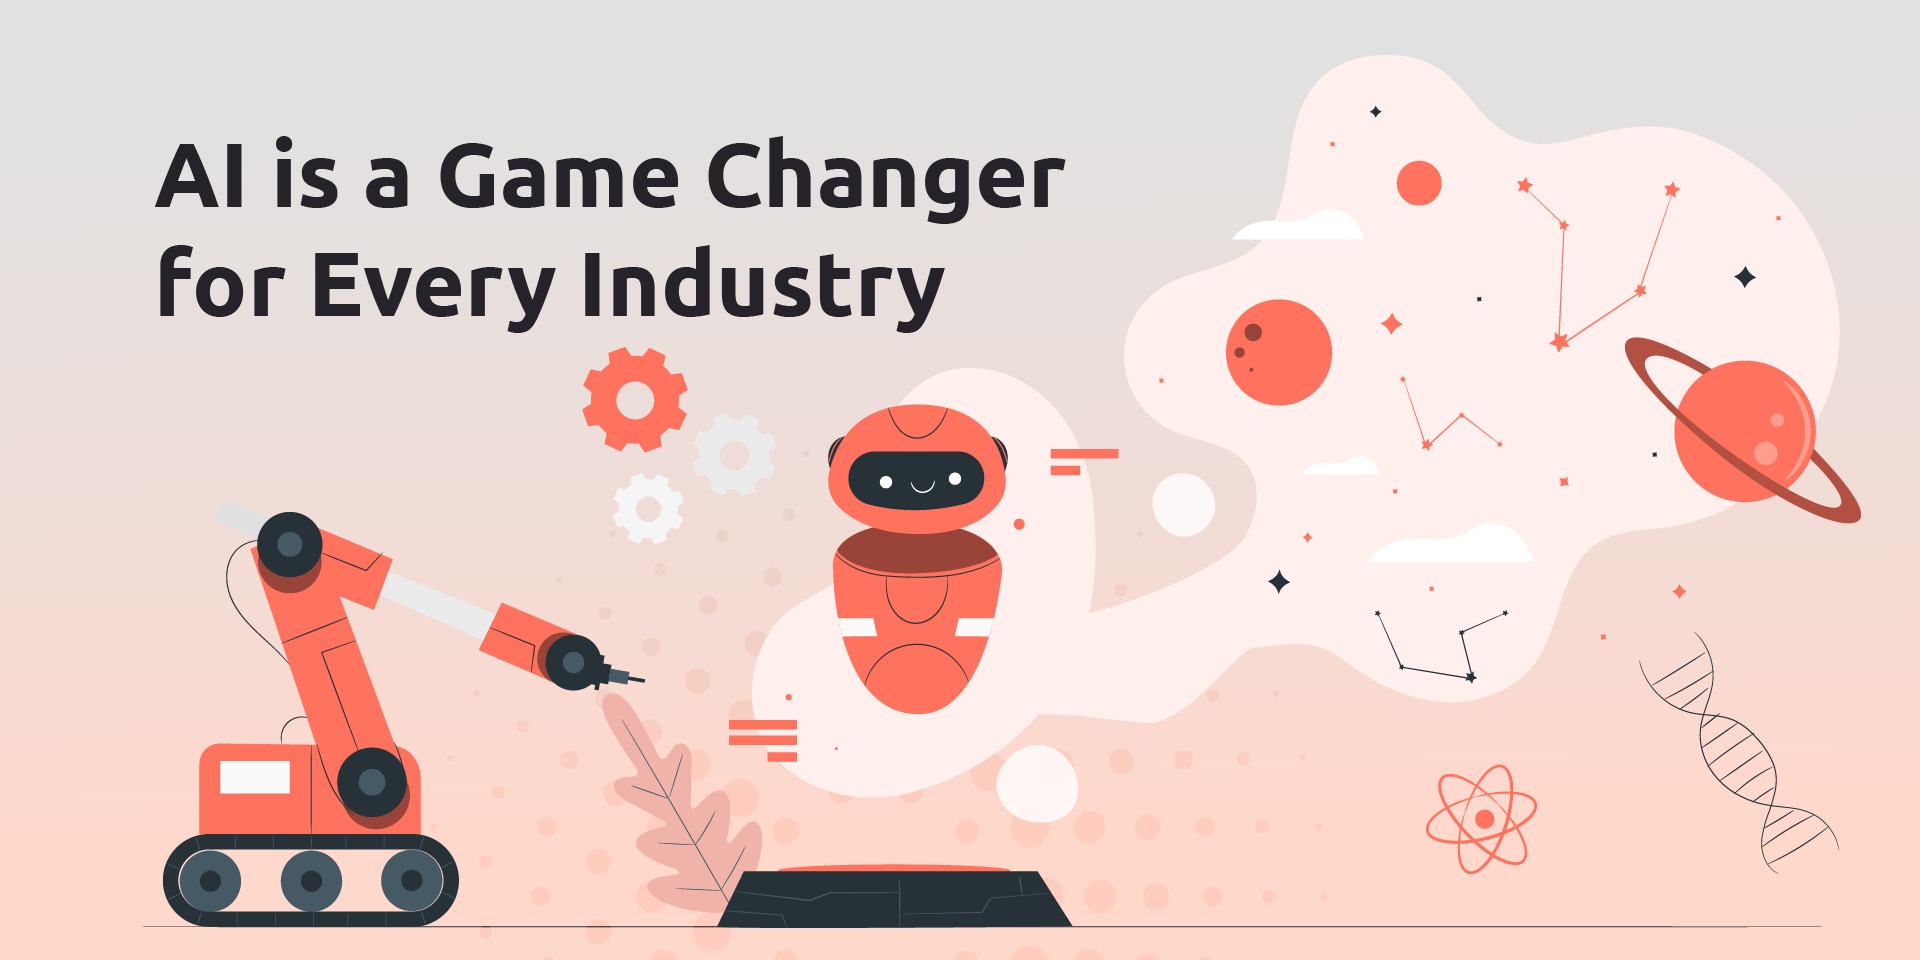 AI is a Game Changer for Every Industry